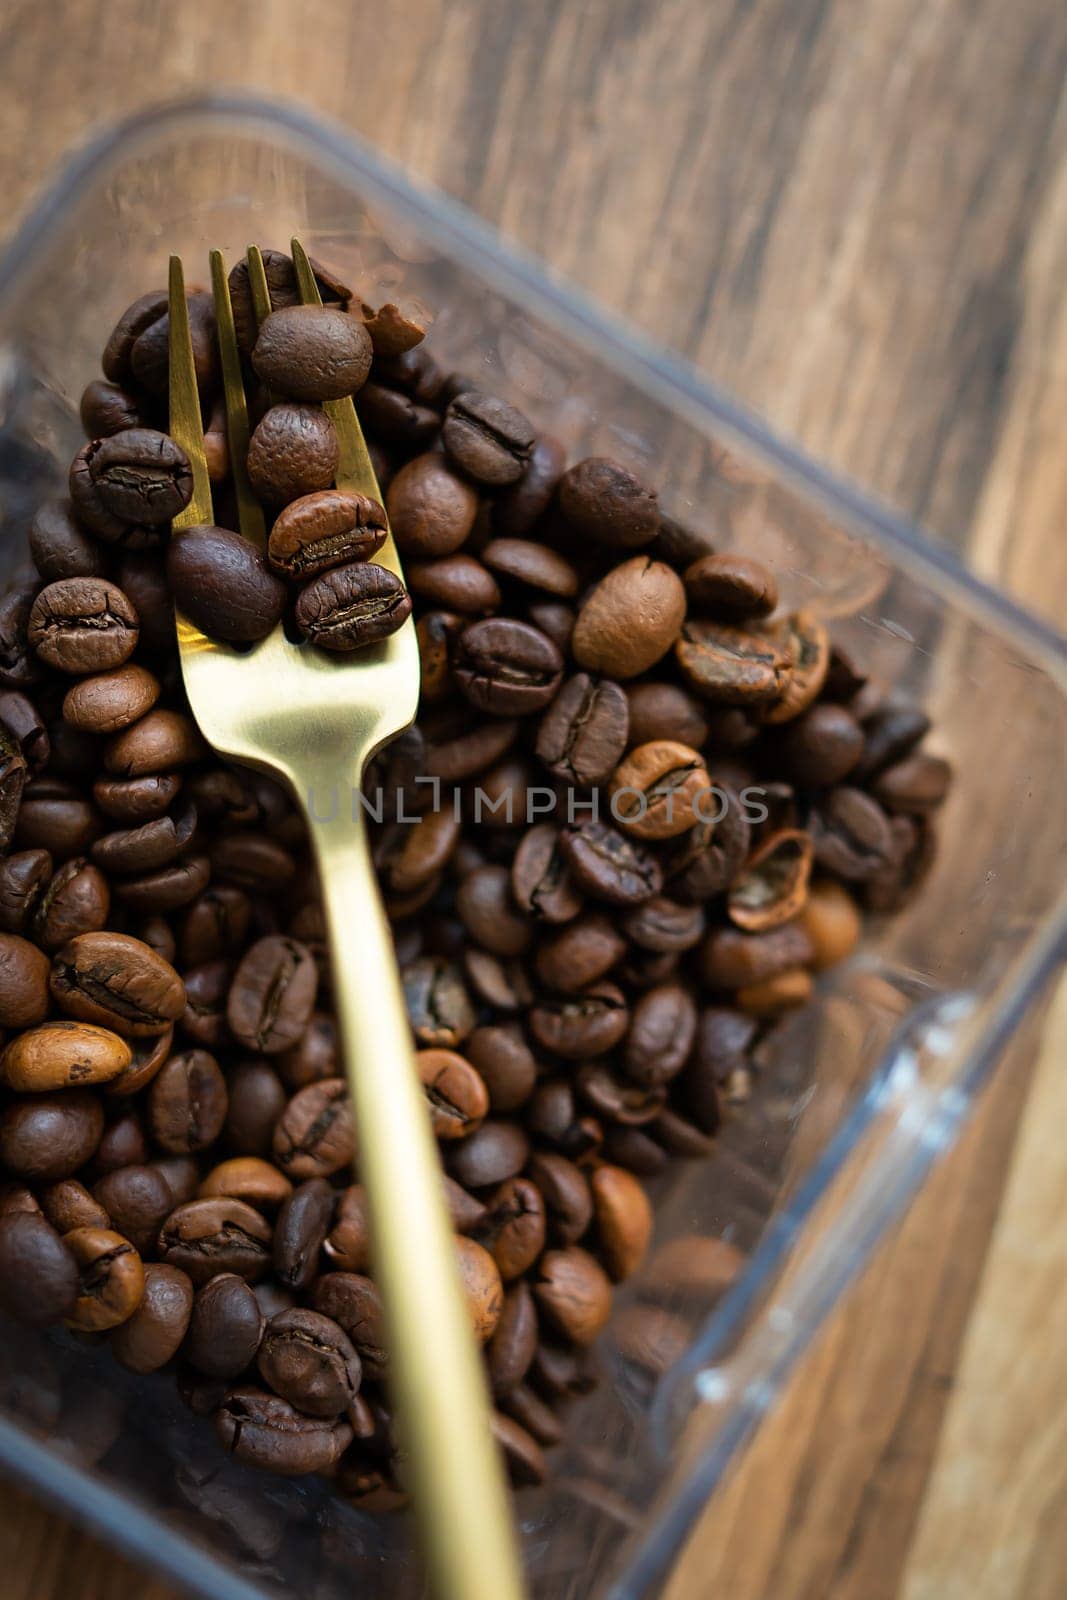 Roasted coffee bean in a plastic box along with a fork, close-up, top view. The concept of making coffee